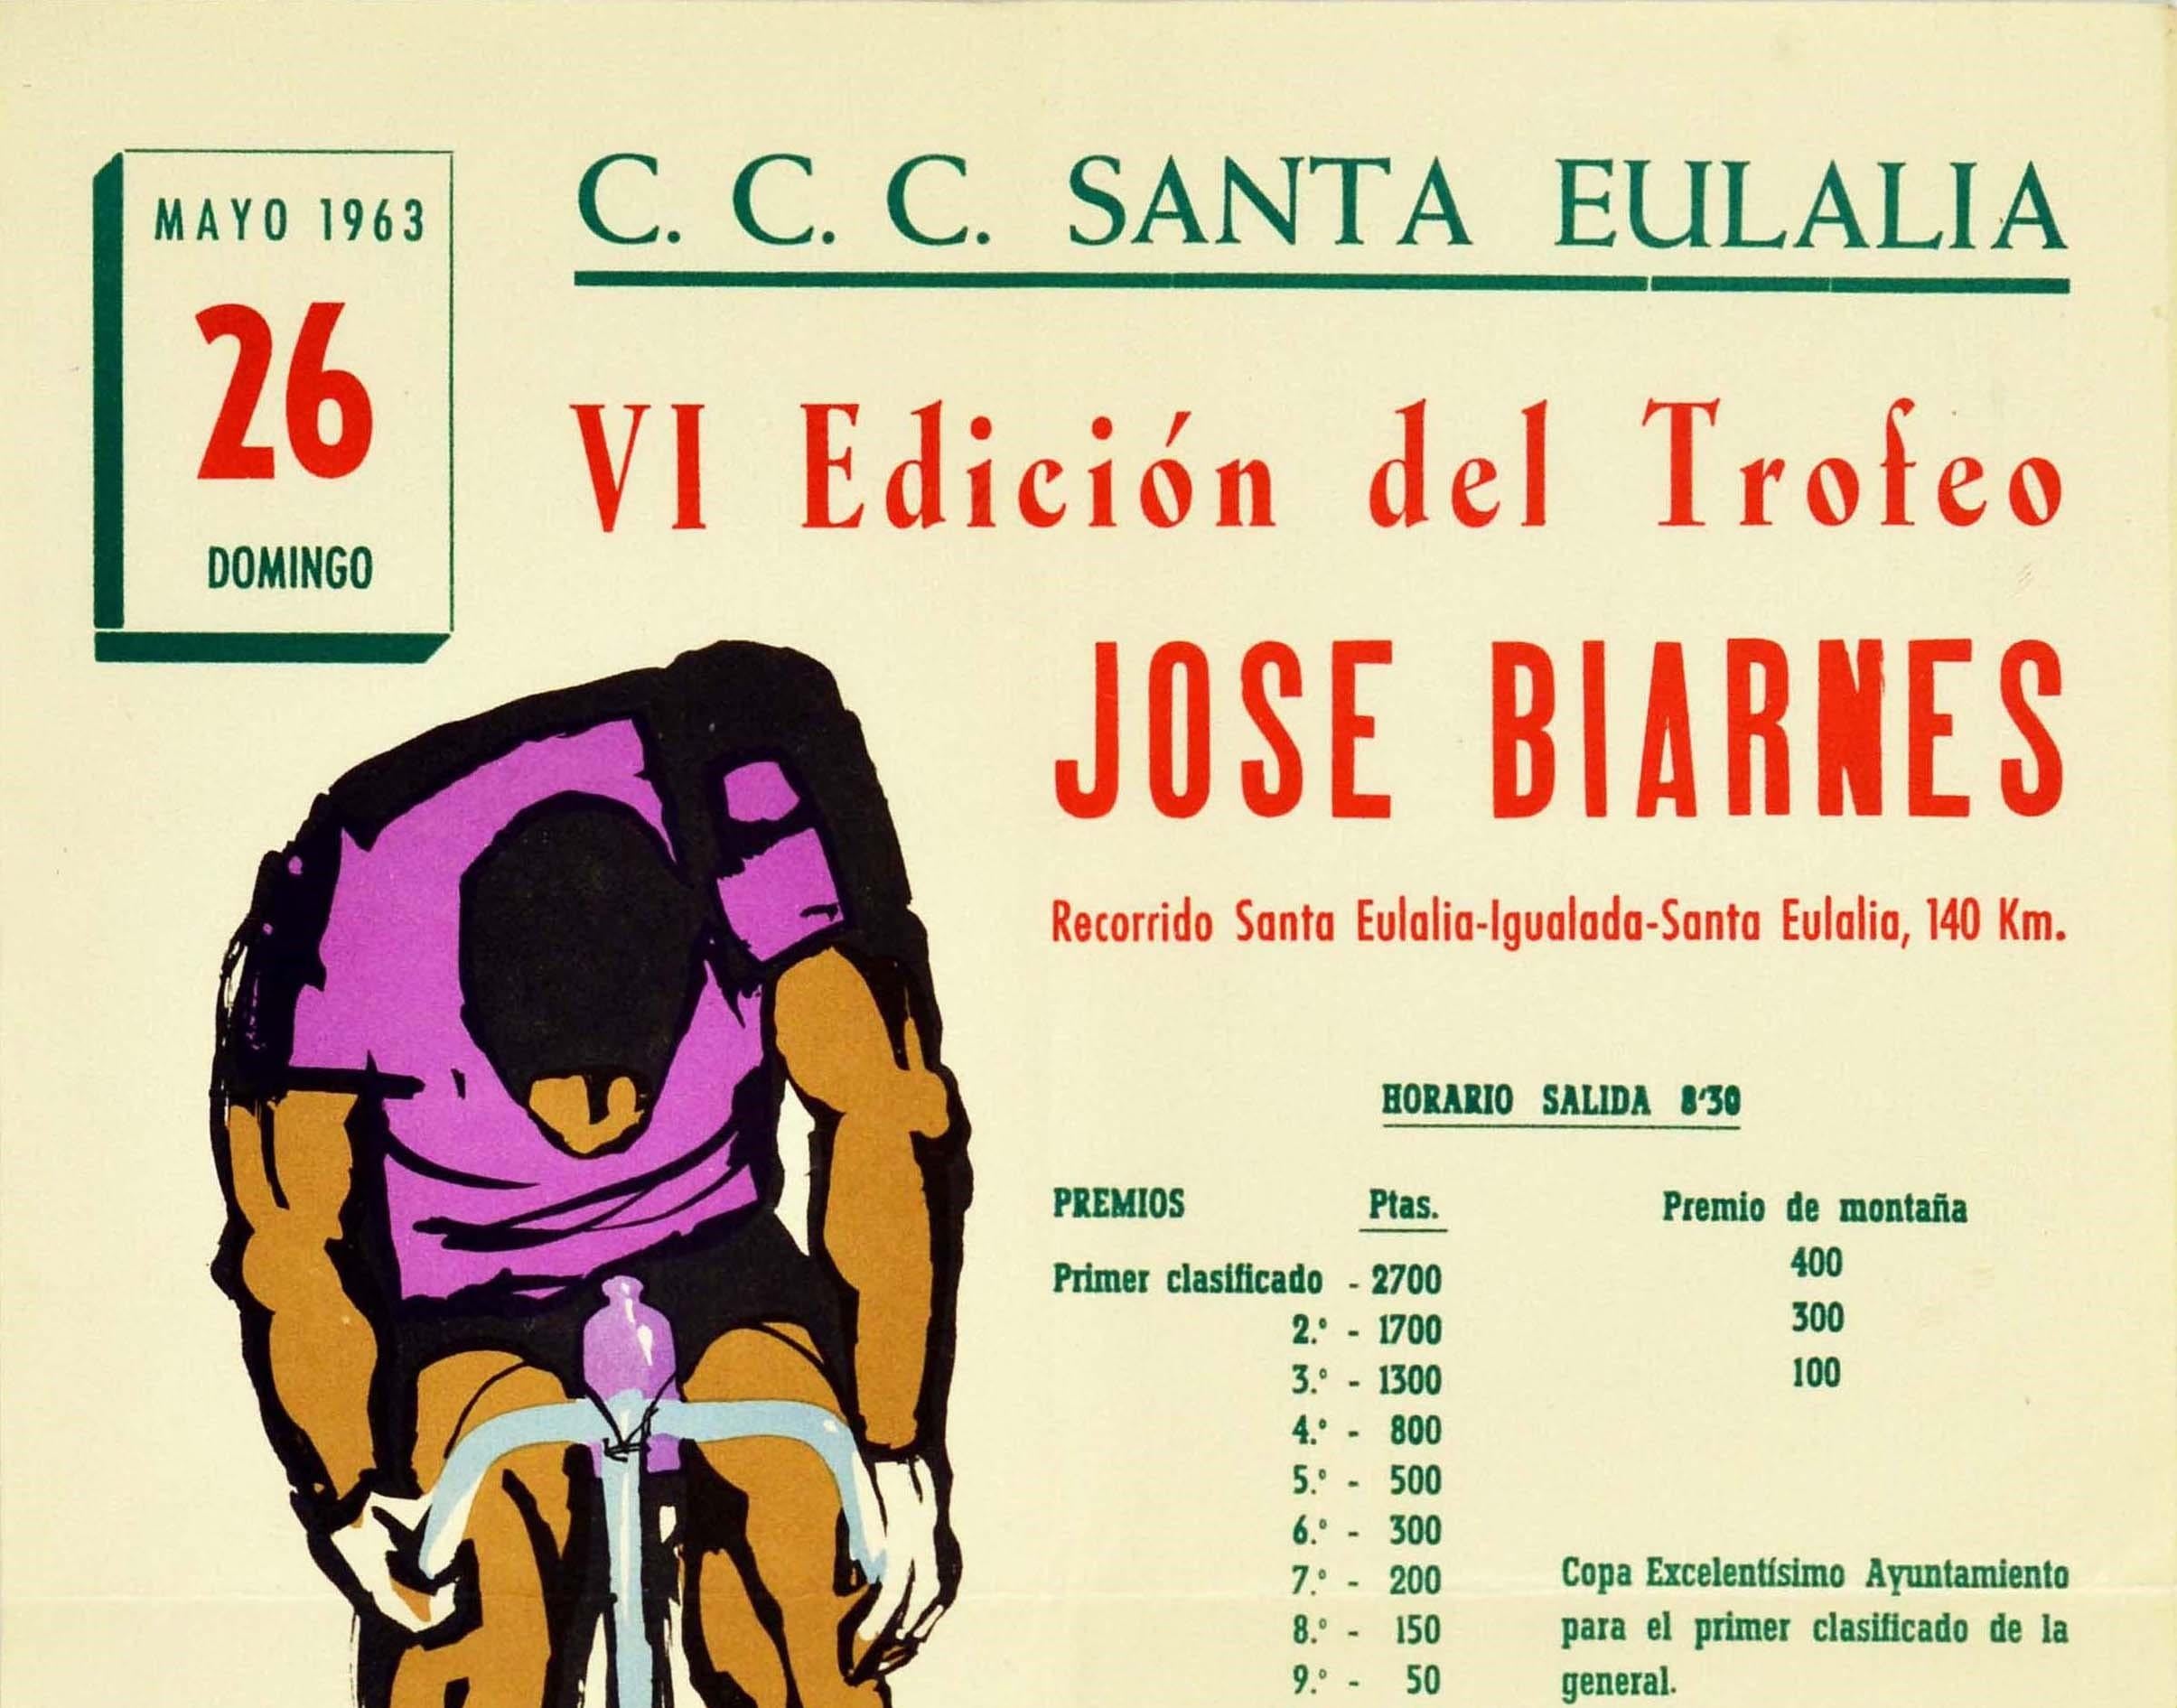 Original vintage sports event poster for the Cycling Trophy of Jose Biarnes on 26 May 1963 - CCC Santa Eulalia VI Edicion del Trofeo Jose Biarnes Recorrido Santa Eulalia Igualada Santa Eulalia, 140km. Great artwork of a racing cyclist in a purple